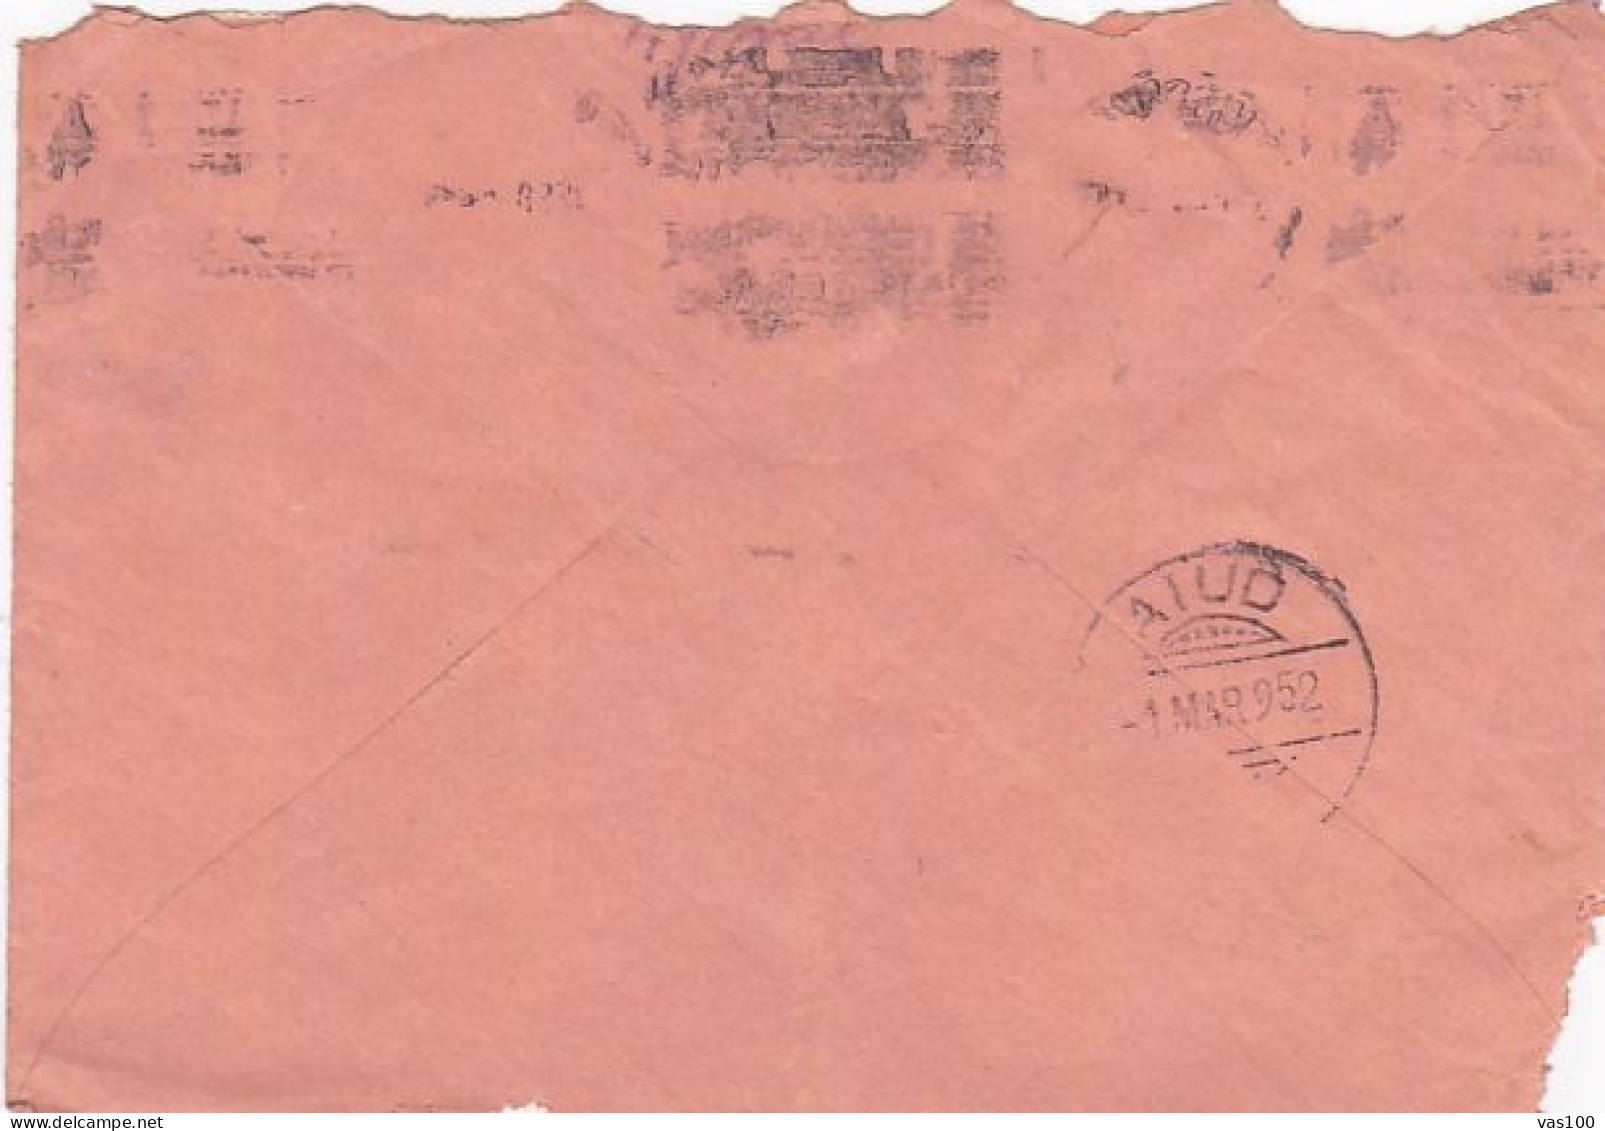 ION LUCA CARAGIALE- WRITER, 55 BANI OVERPRINT STAMP ON COVER, 1952, ROMANIA - Covers & Documents